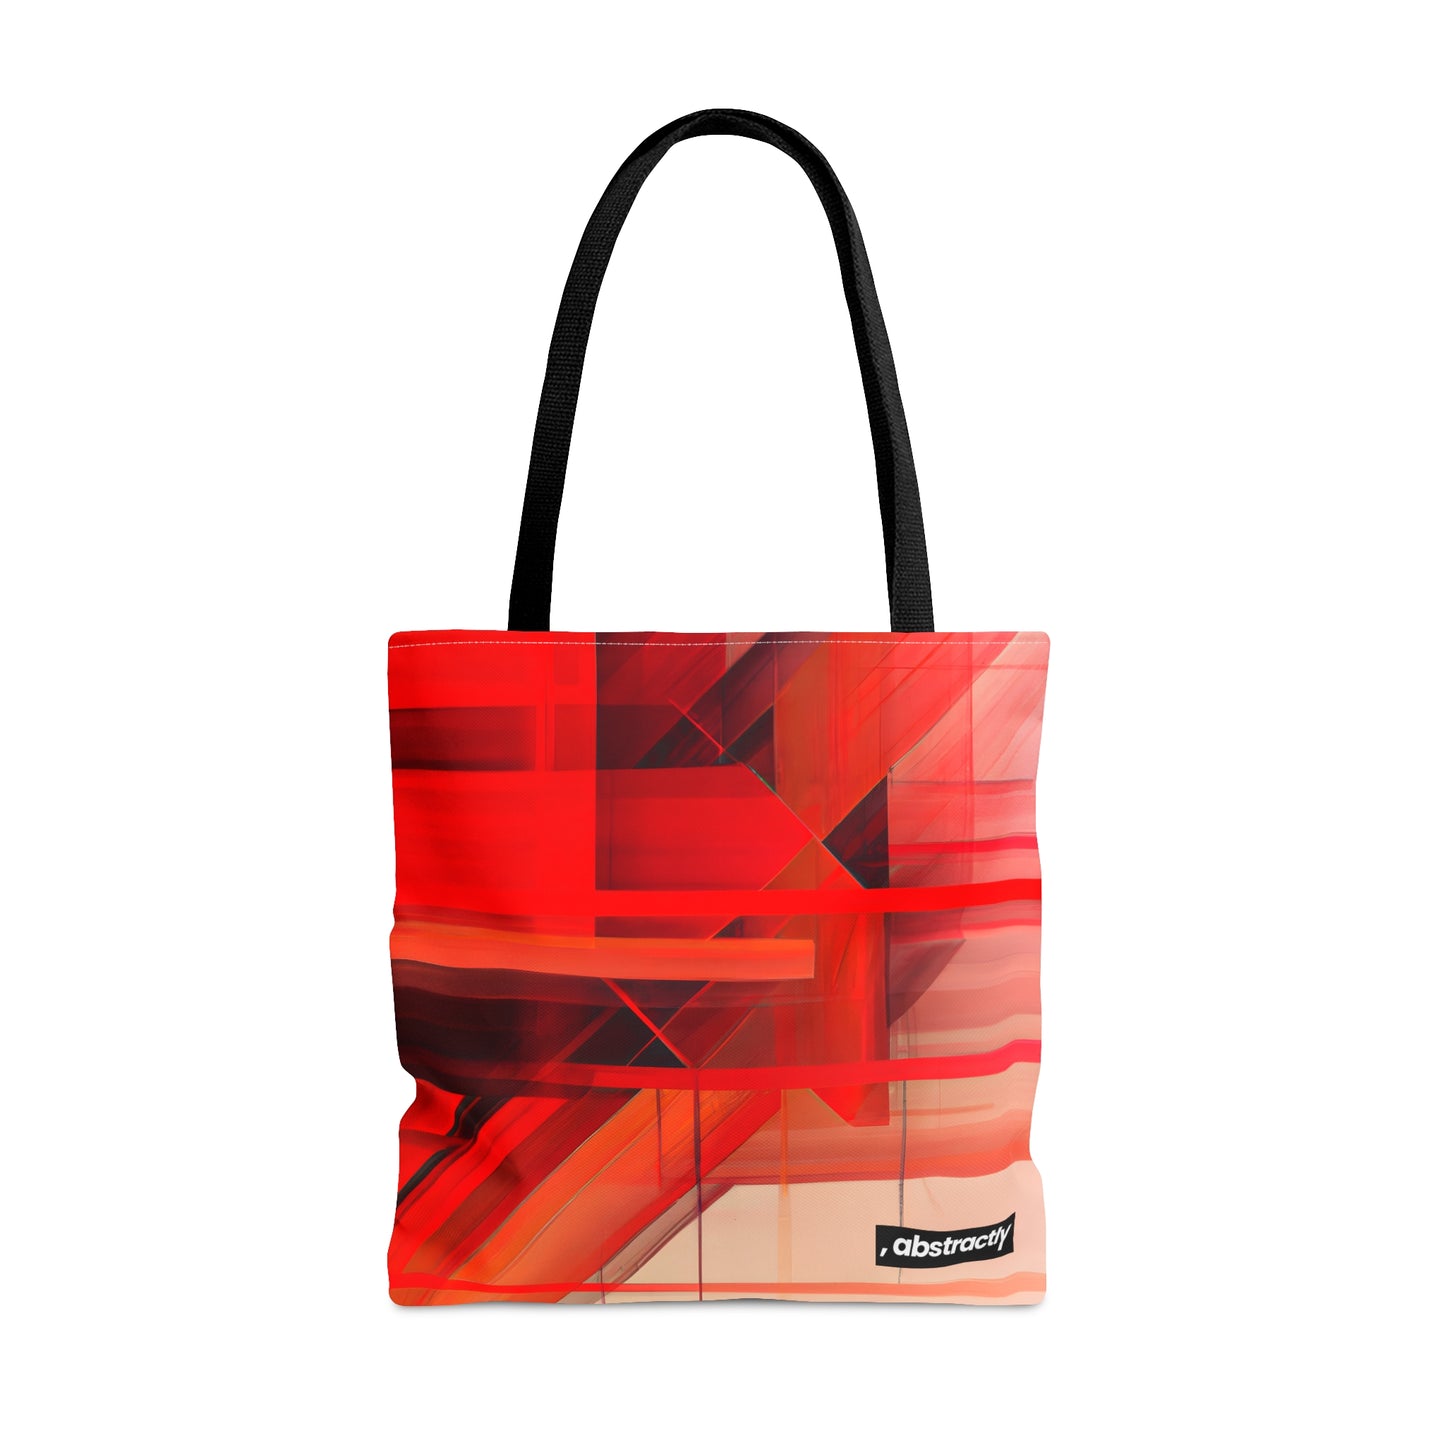 Elaine Stryker - Electric Force, Abstractly - Tote